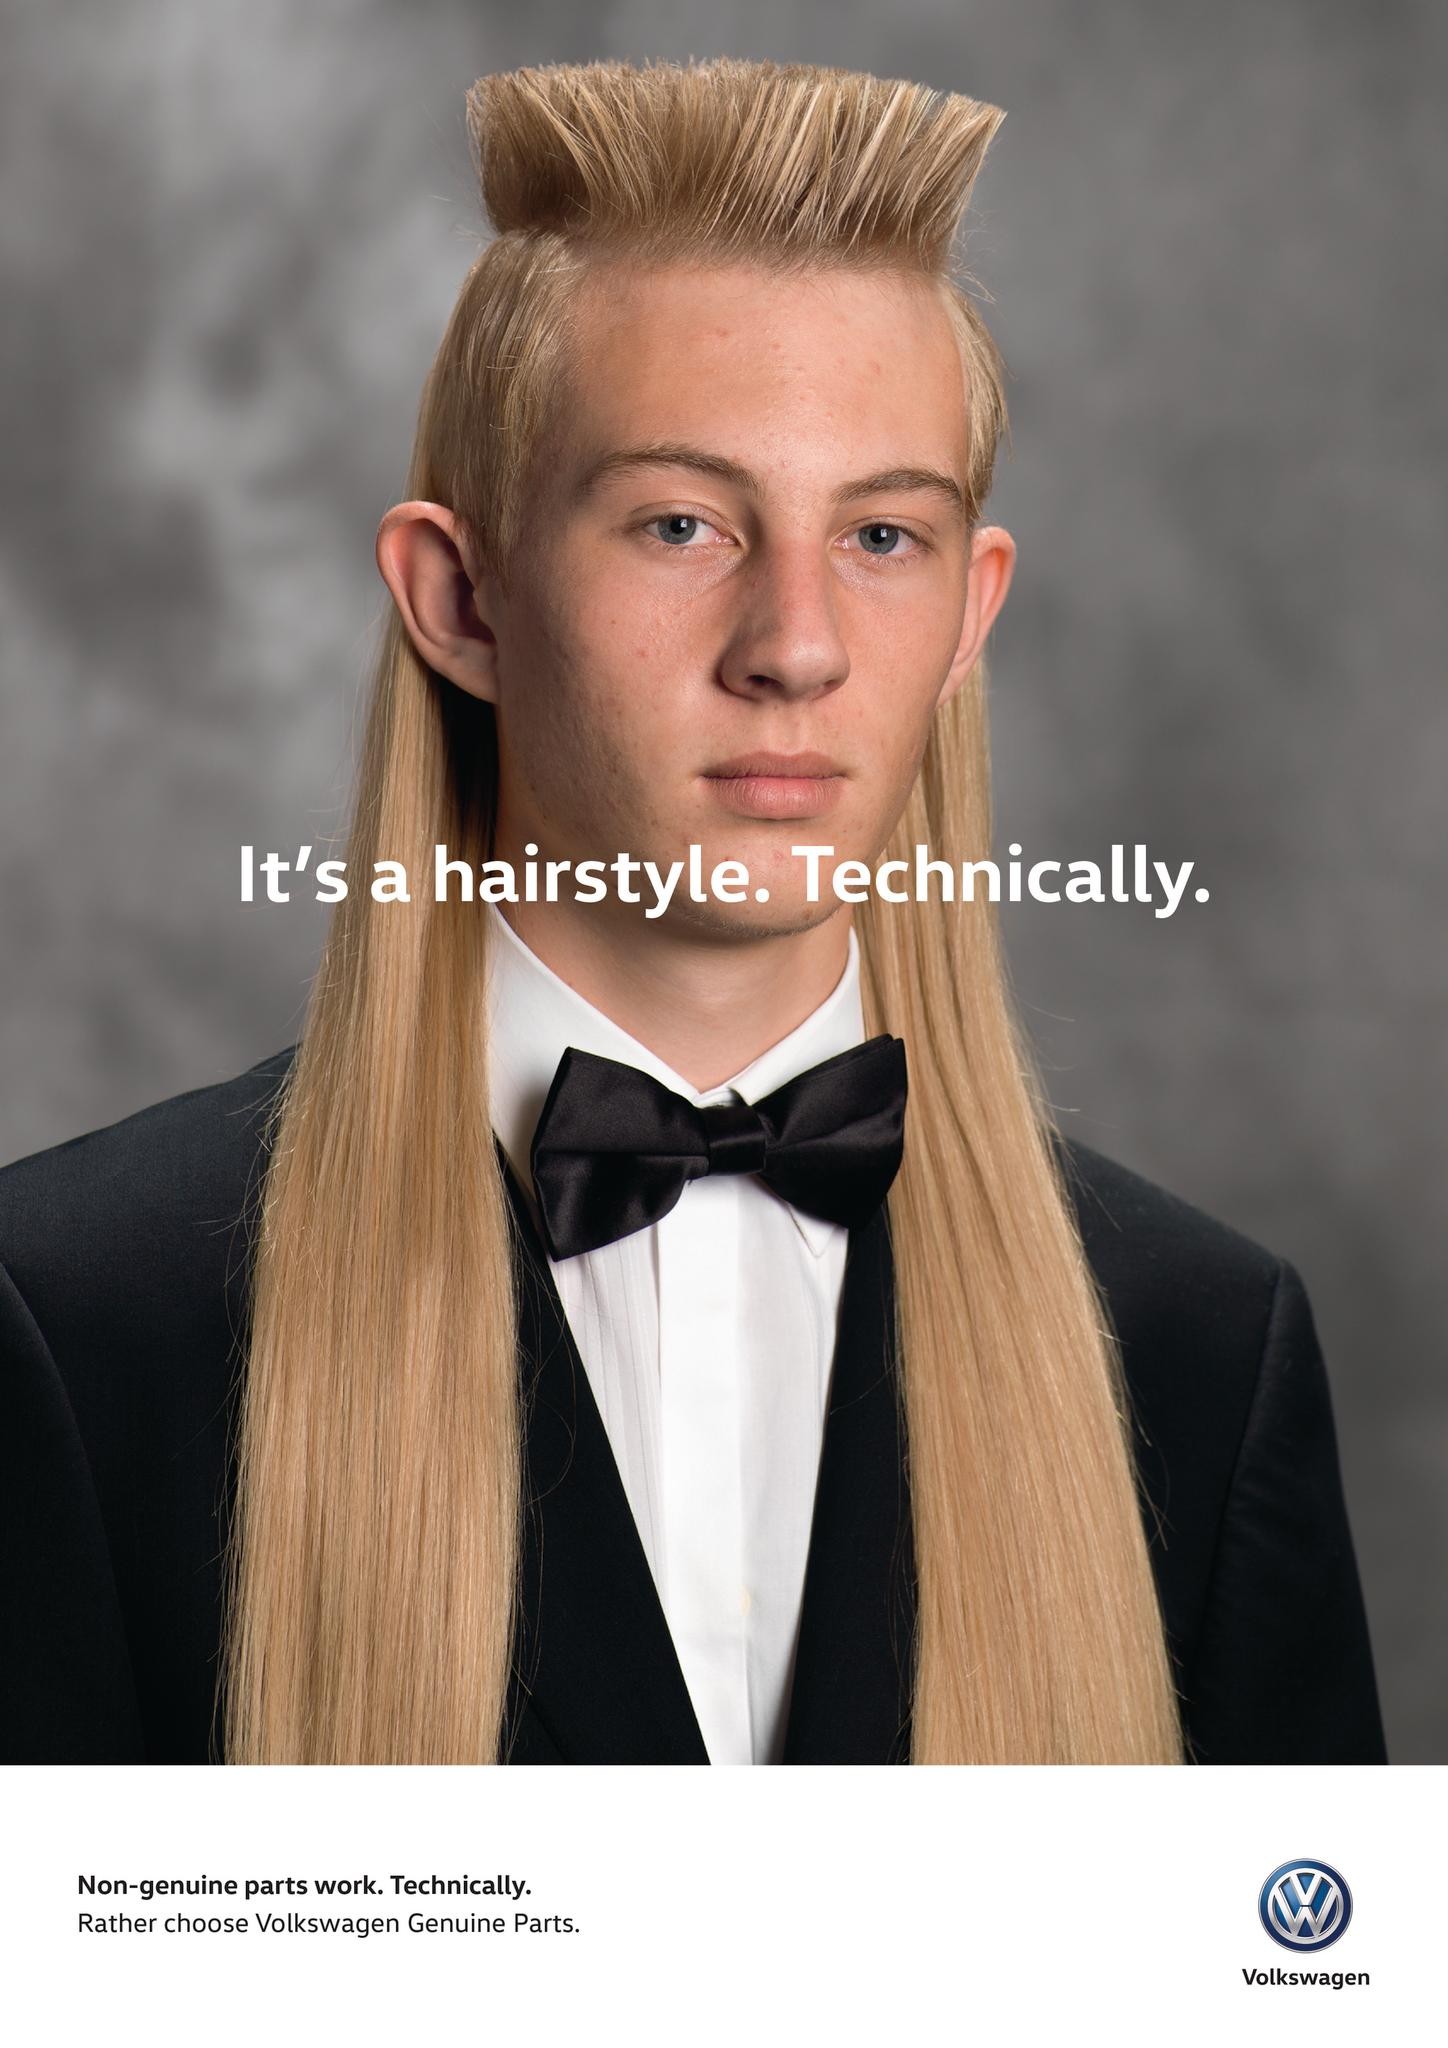 TECHNICALLY HAIRSTYLE